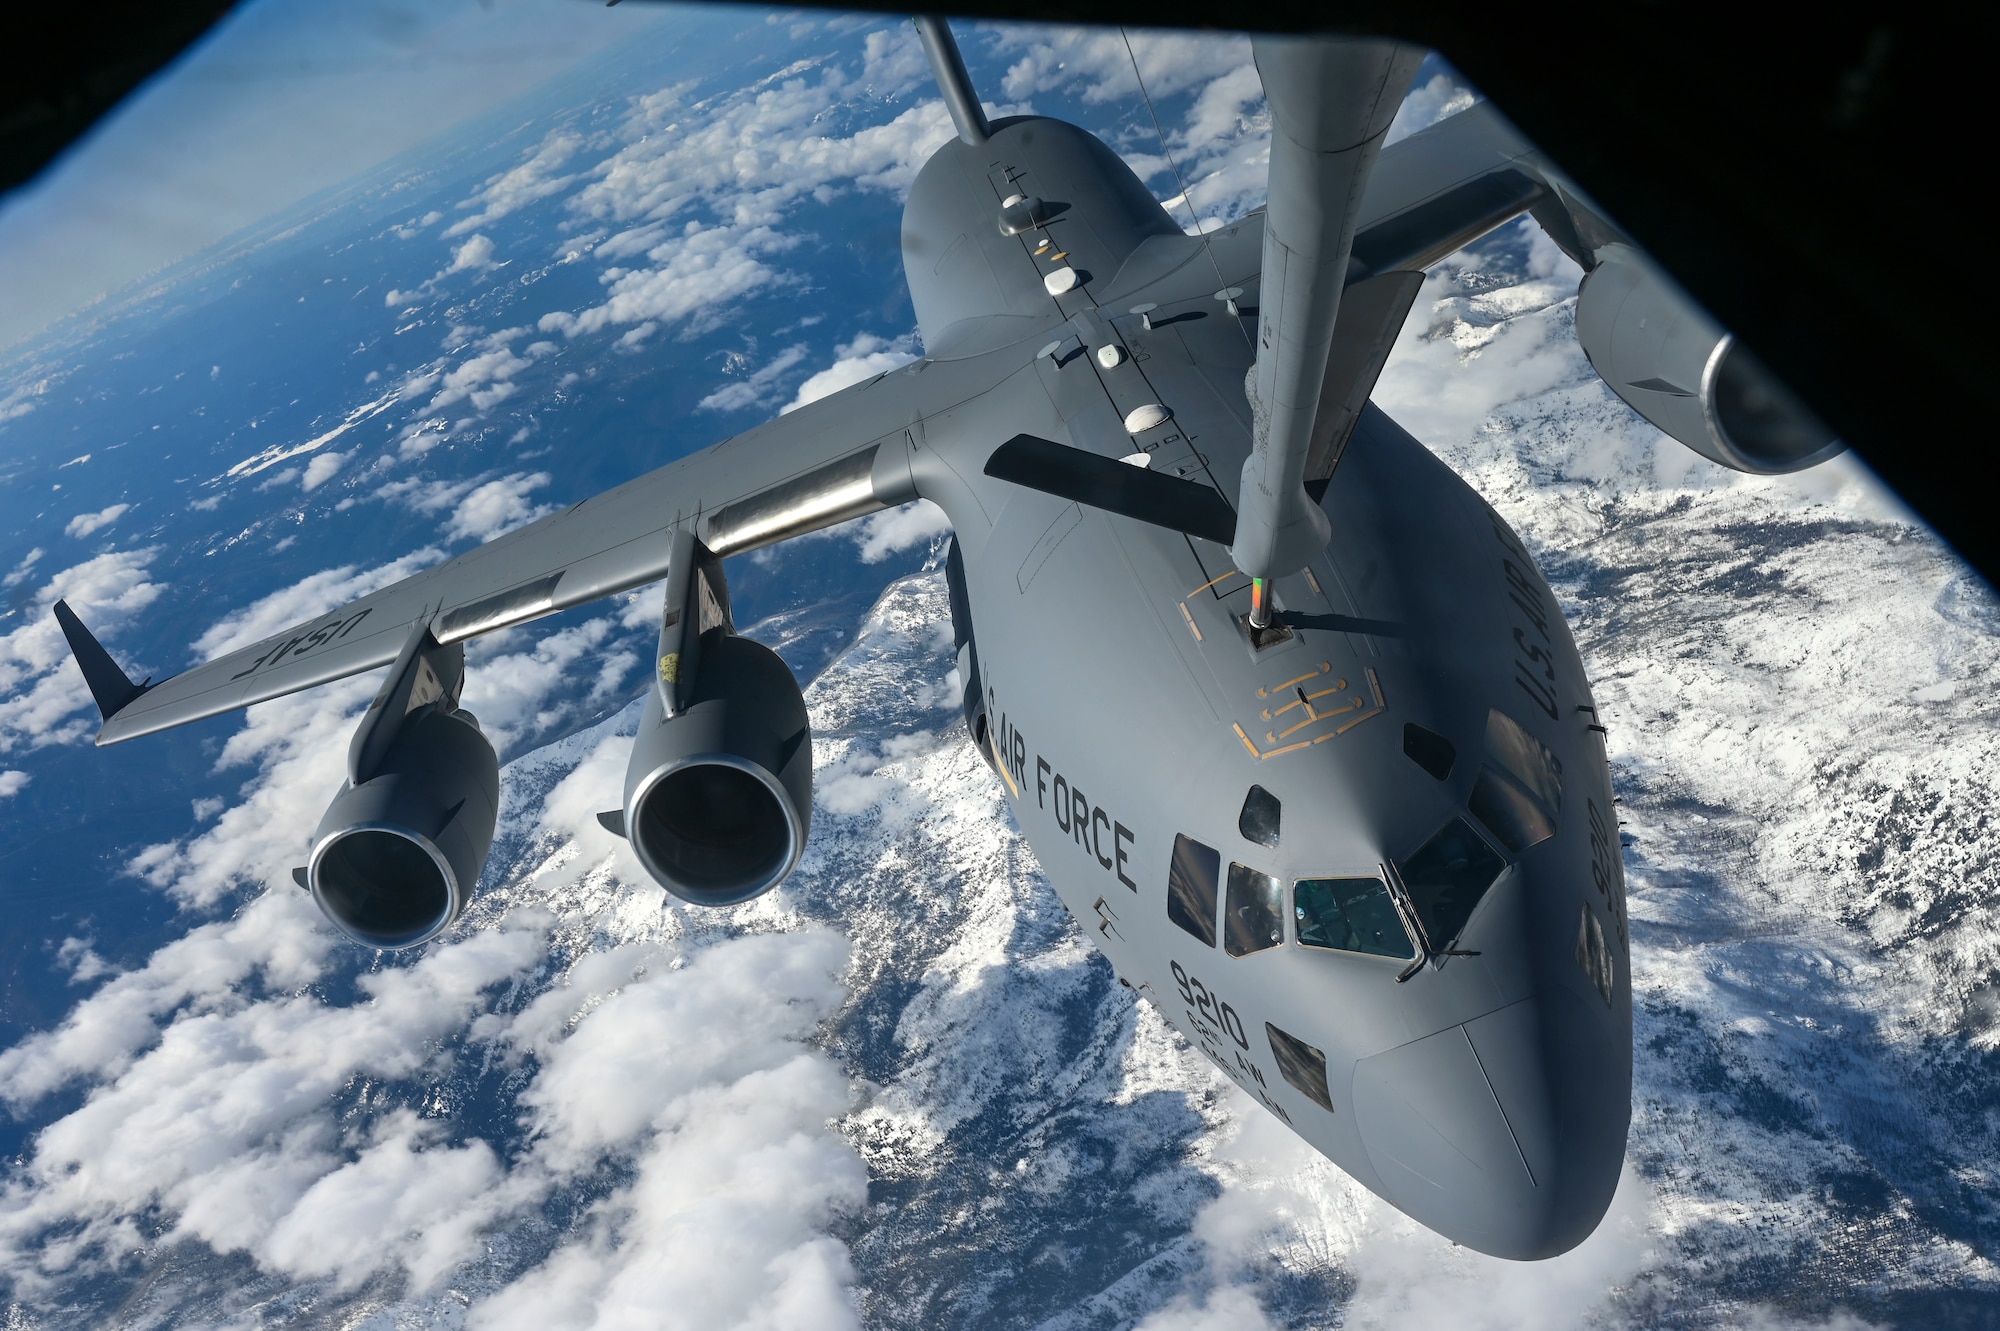 A C-17 receives aerial refueling